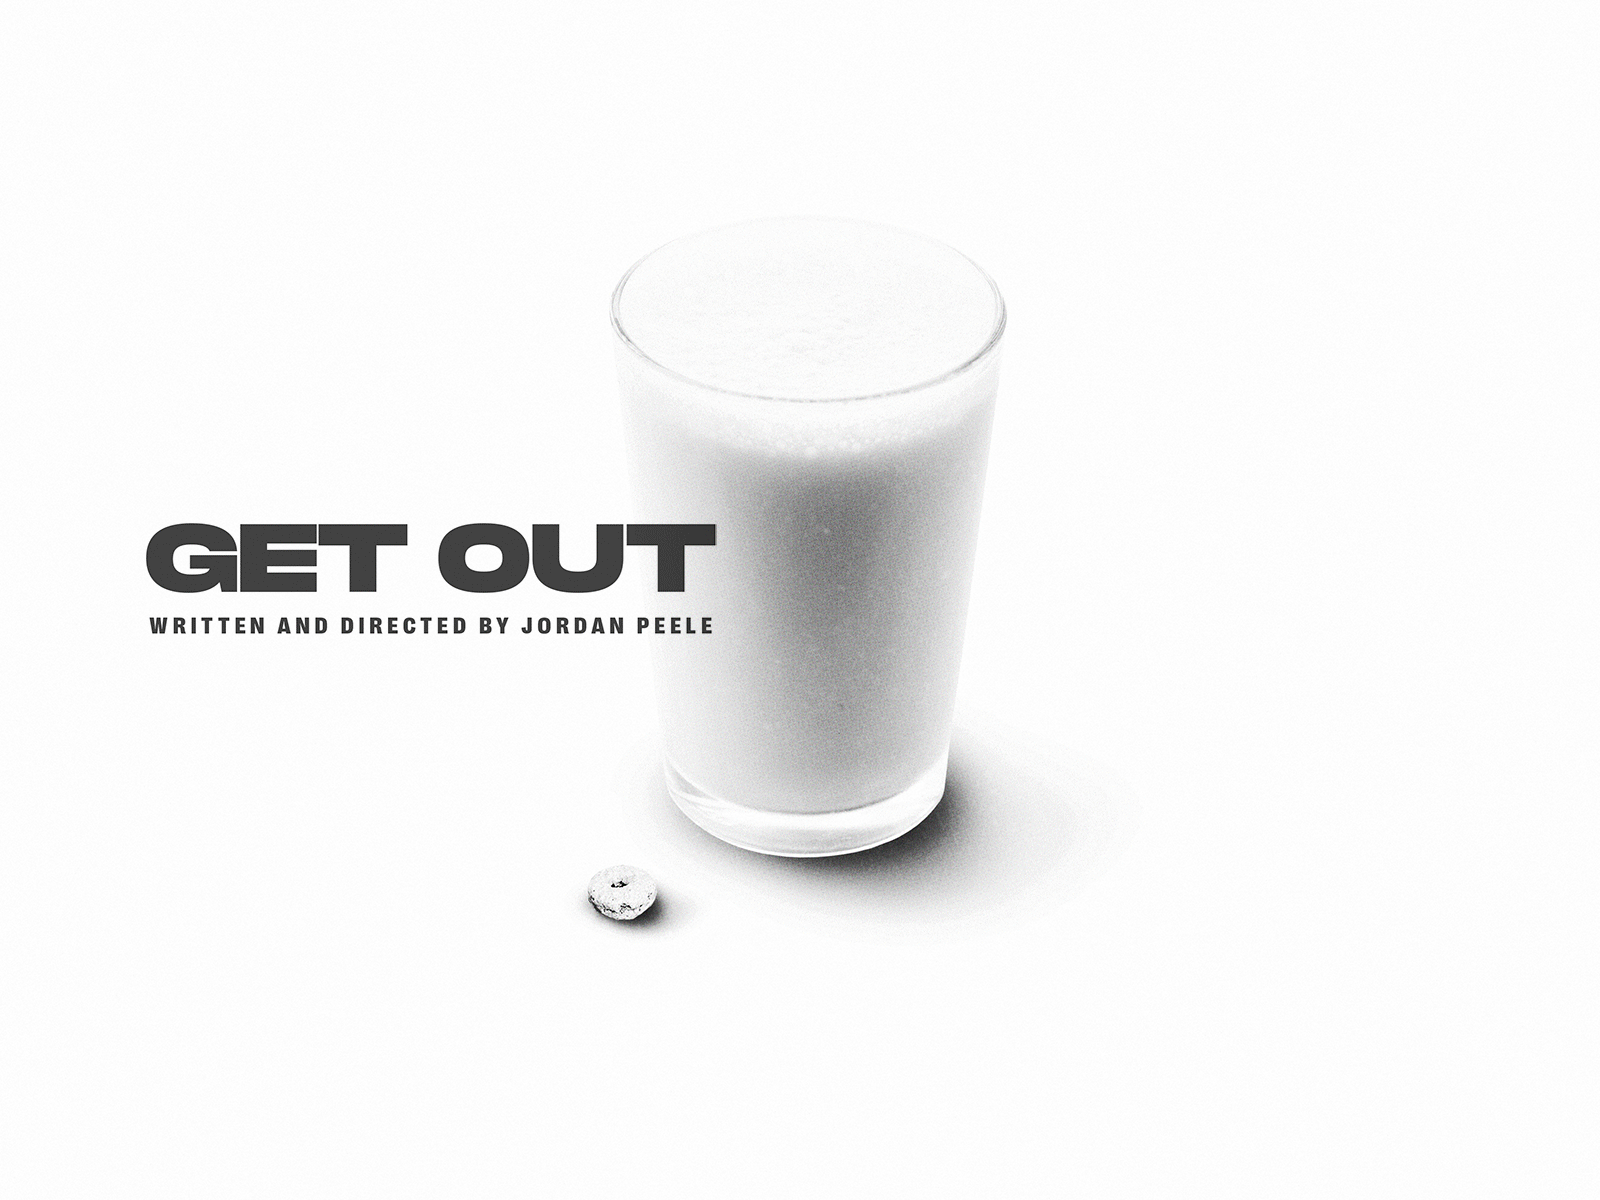 Get Out / Poster design